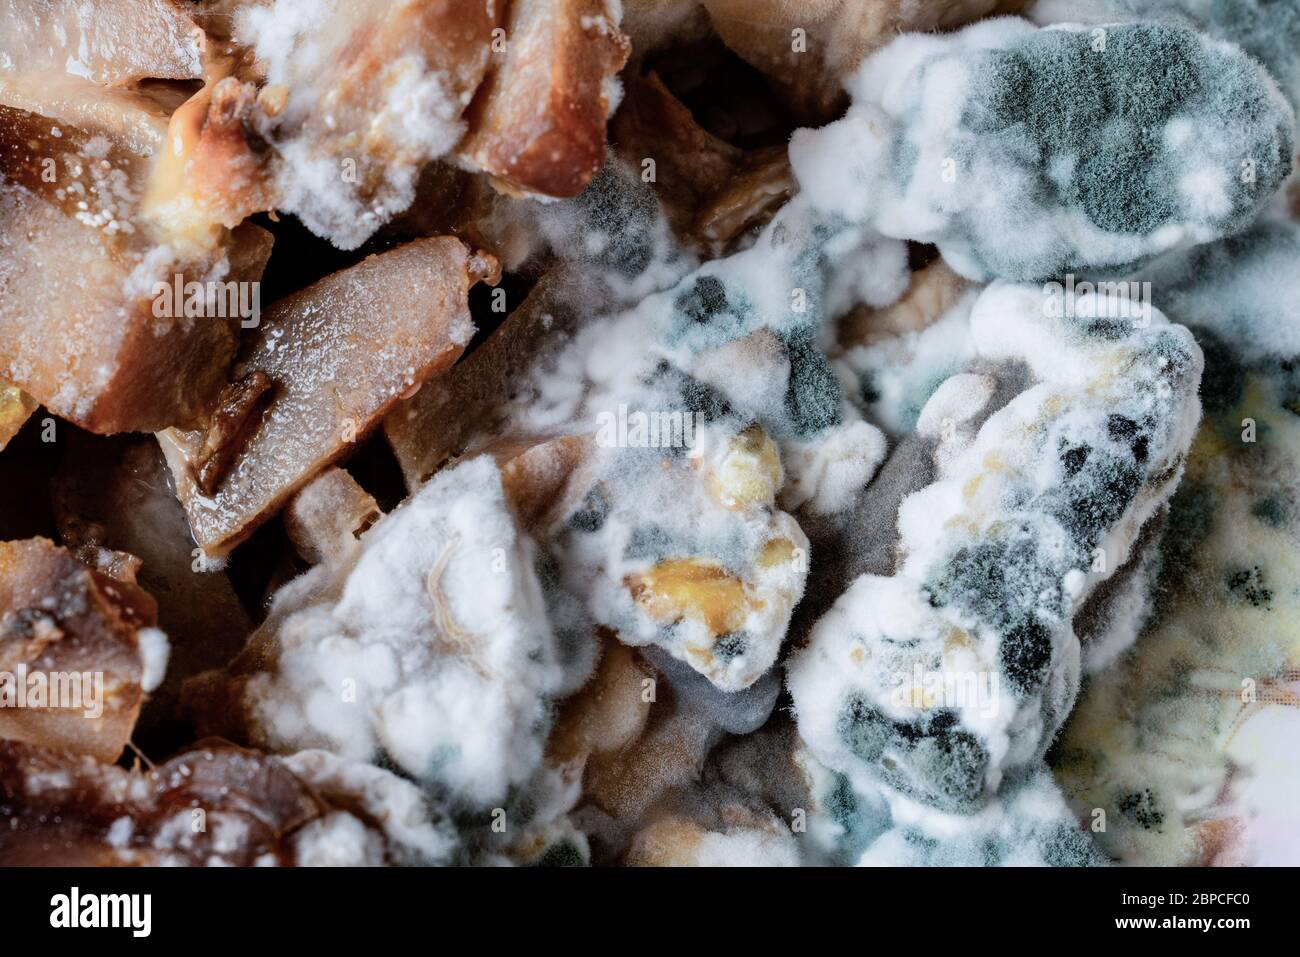 Moldy potato salad in a plate Stock Photo